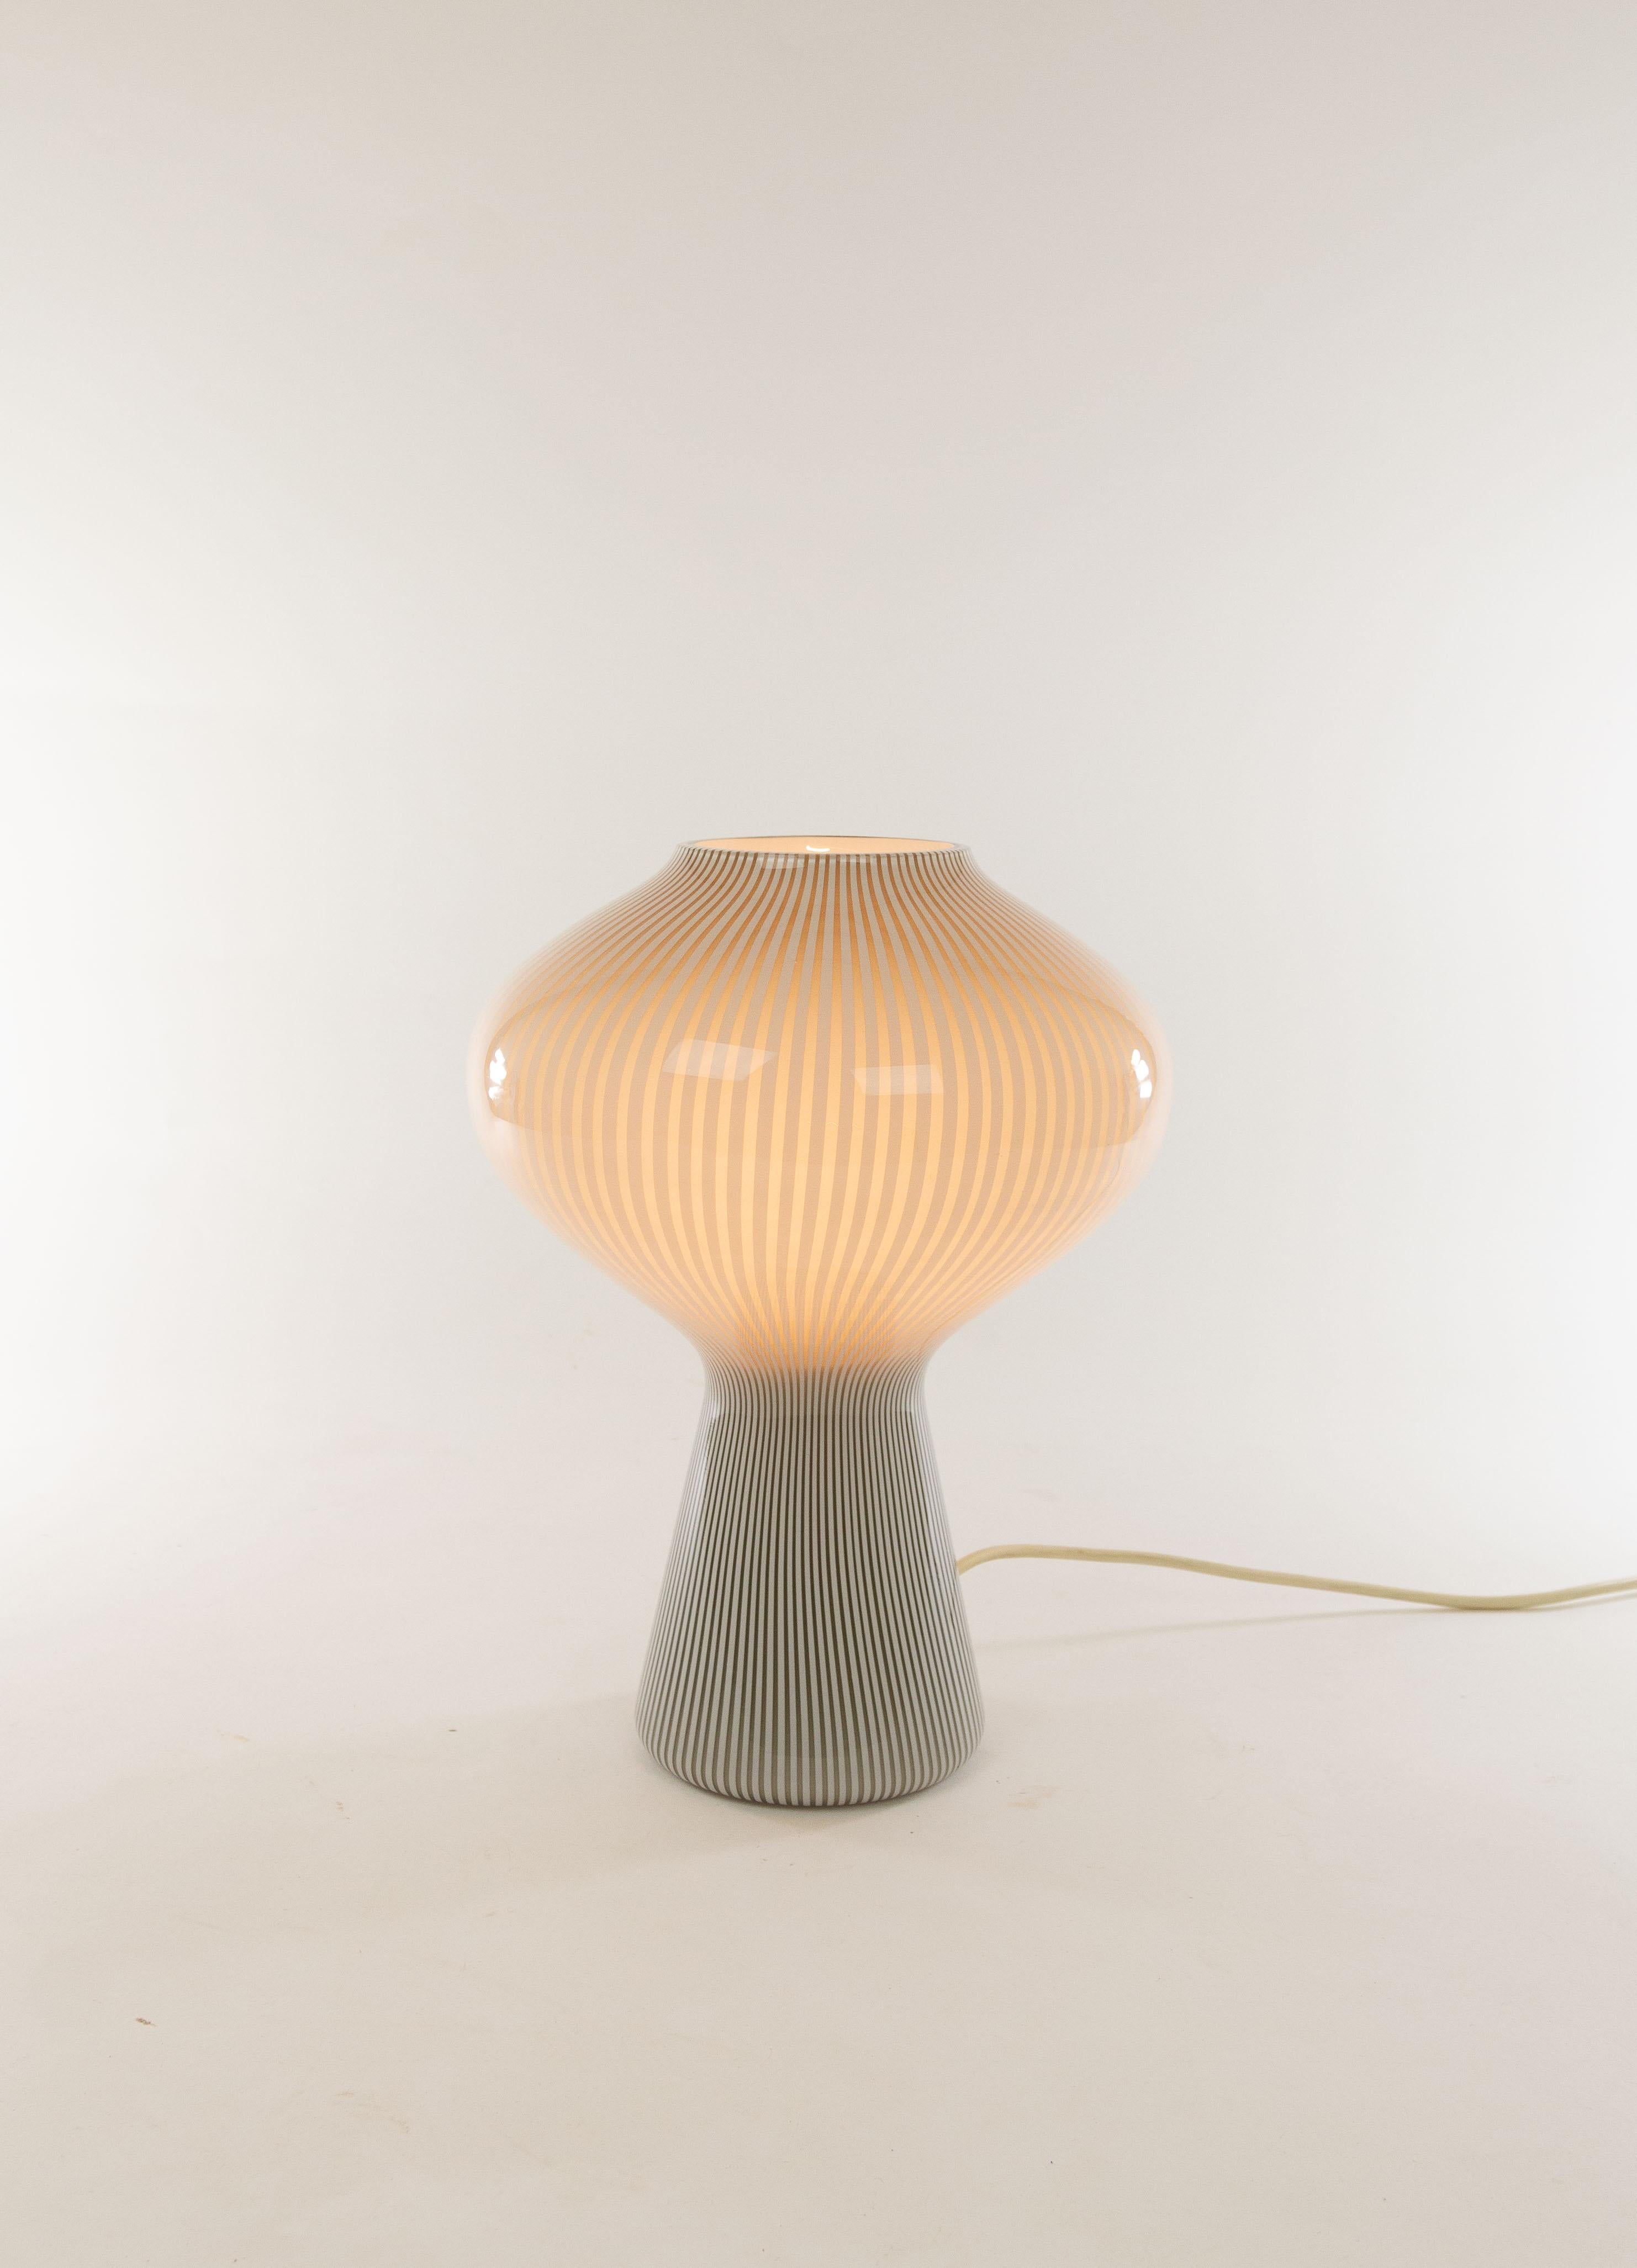 A hand blown grey-white striped glass Fungo table lamp designed by Massimo Vignelli at the start of his impressive career in design and executed by Murano glass specialist Venini. 

This model is produced in three different sizes; this is the